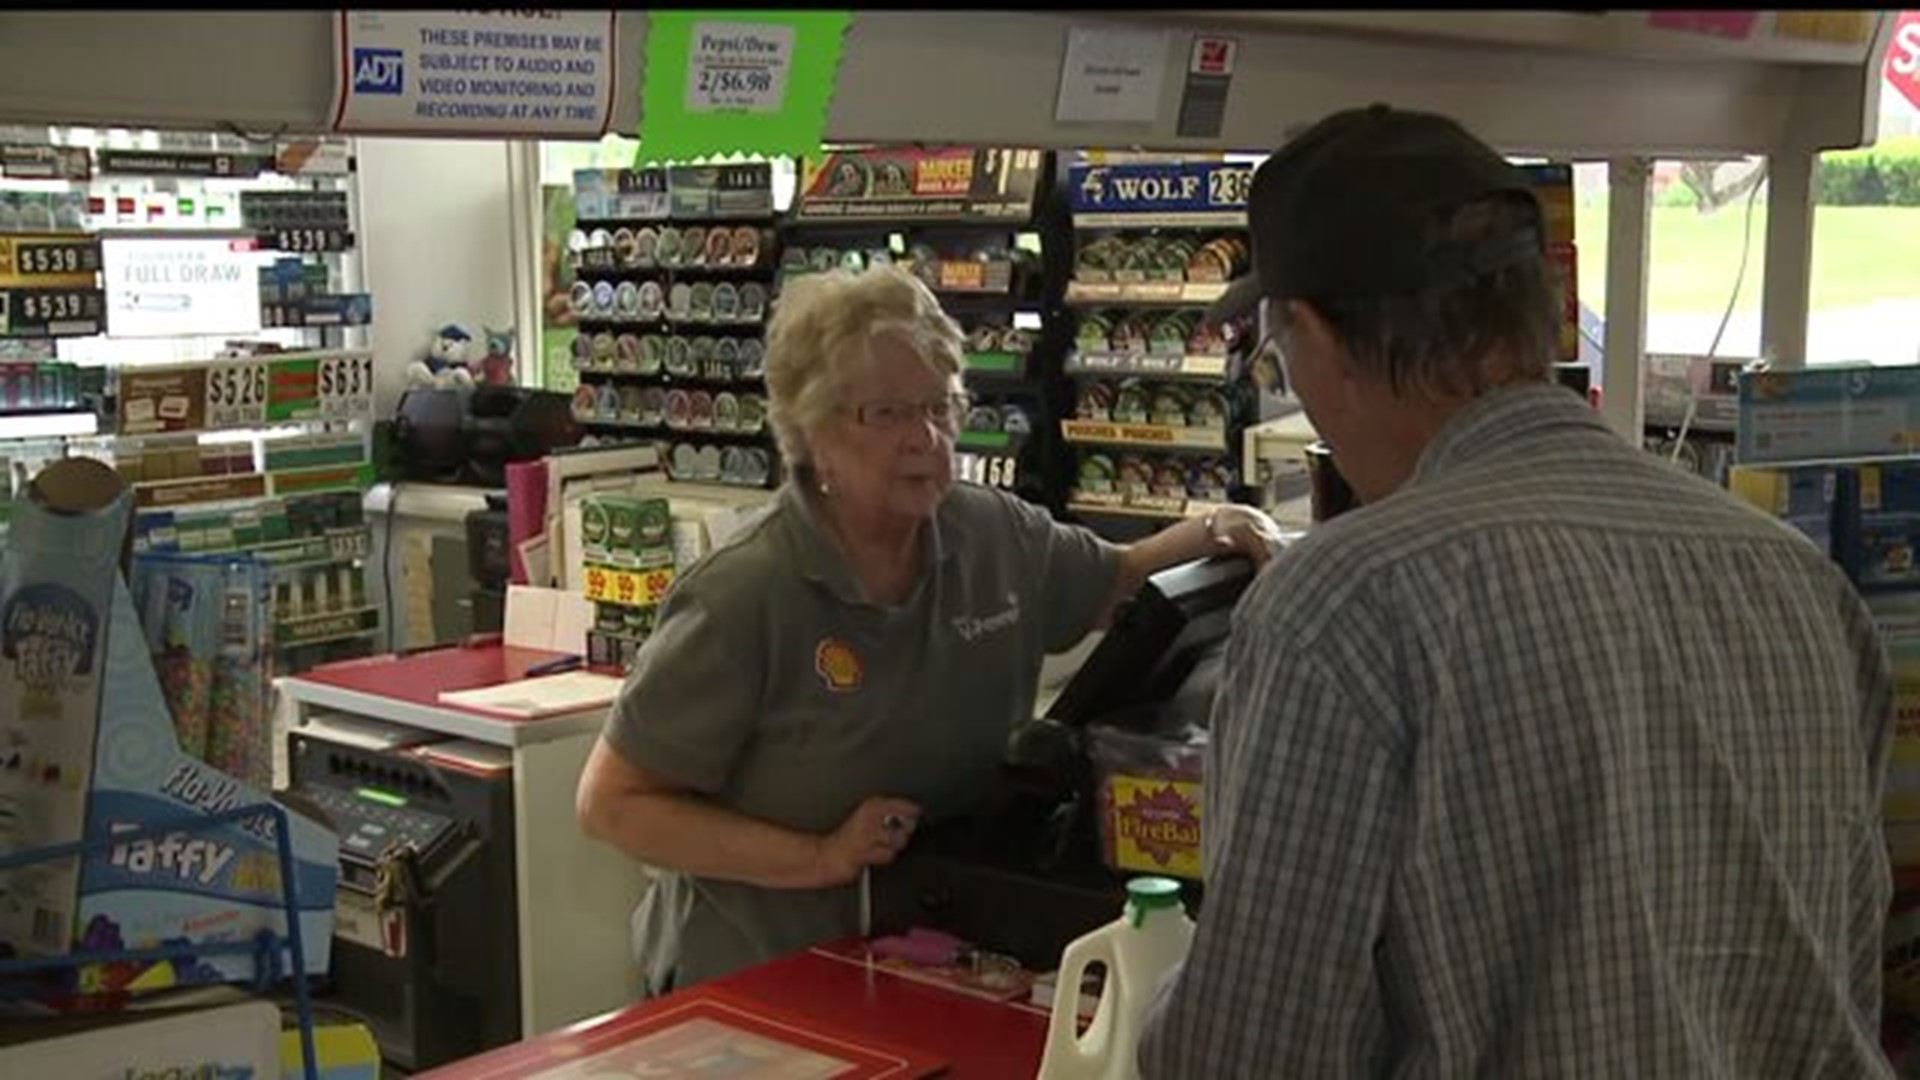 77-year old woman thrives at work despite Upper Dauphin robbery